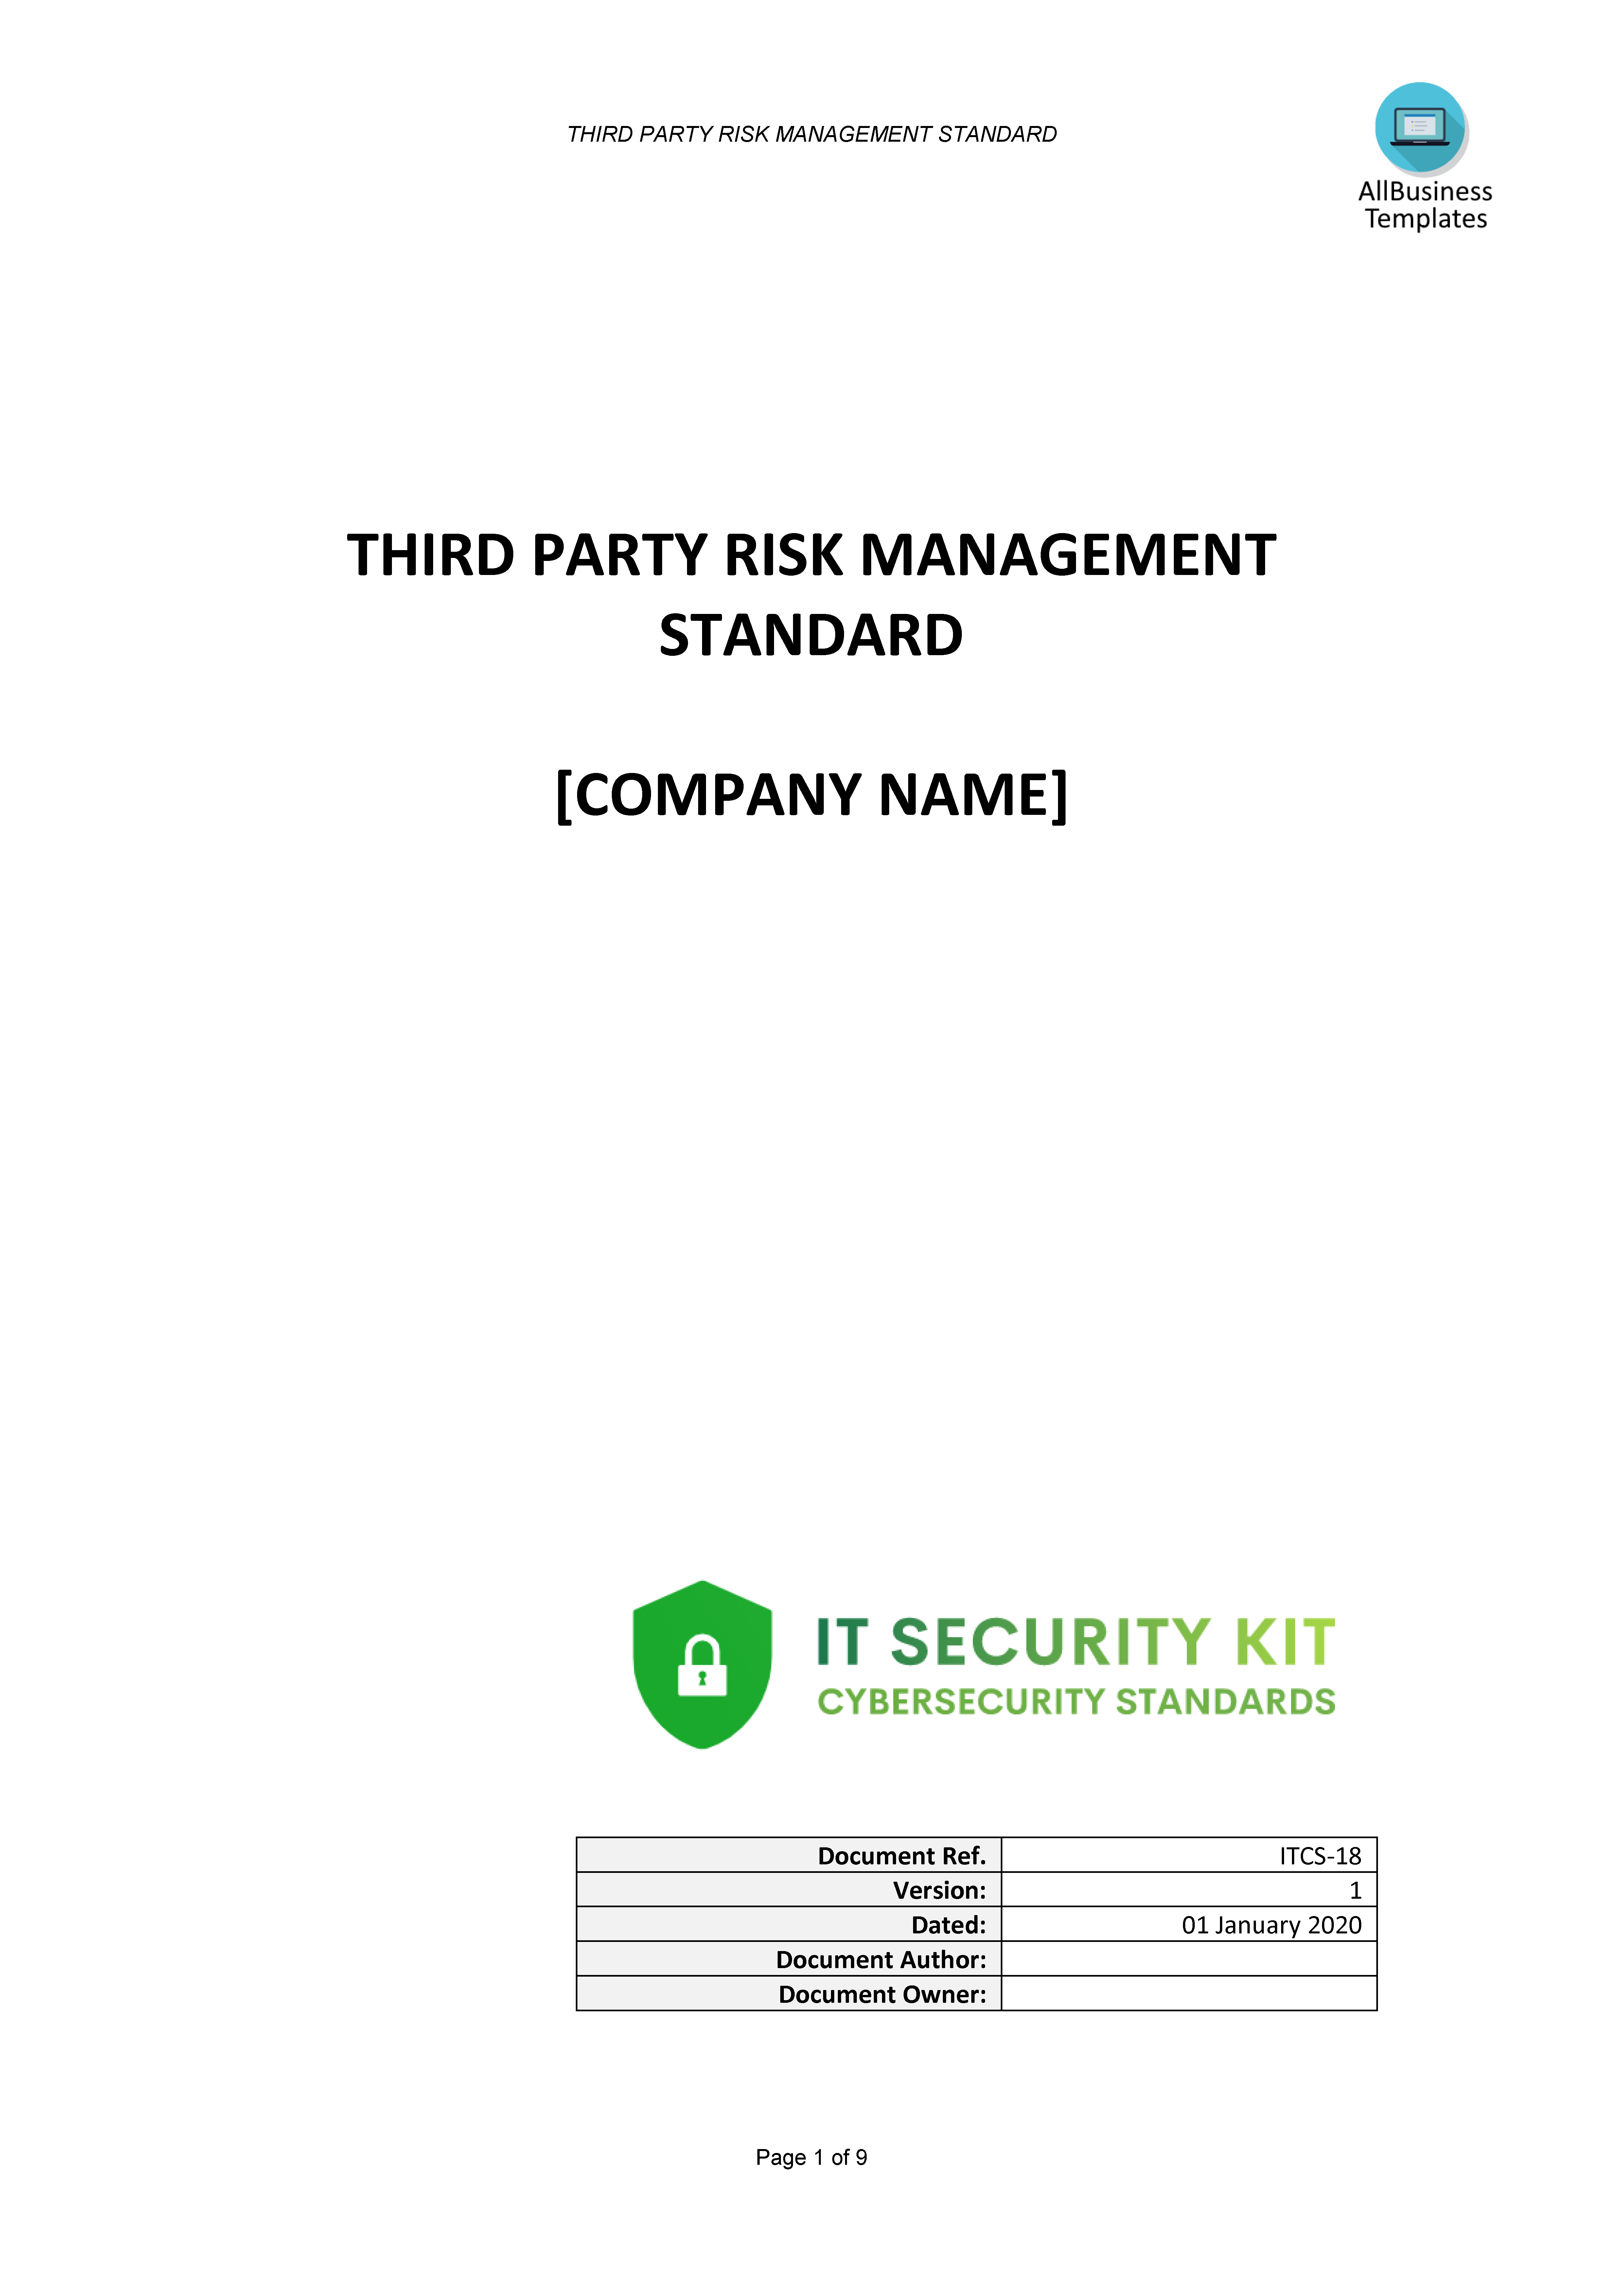 Third Party Risk Management Standard main image